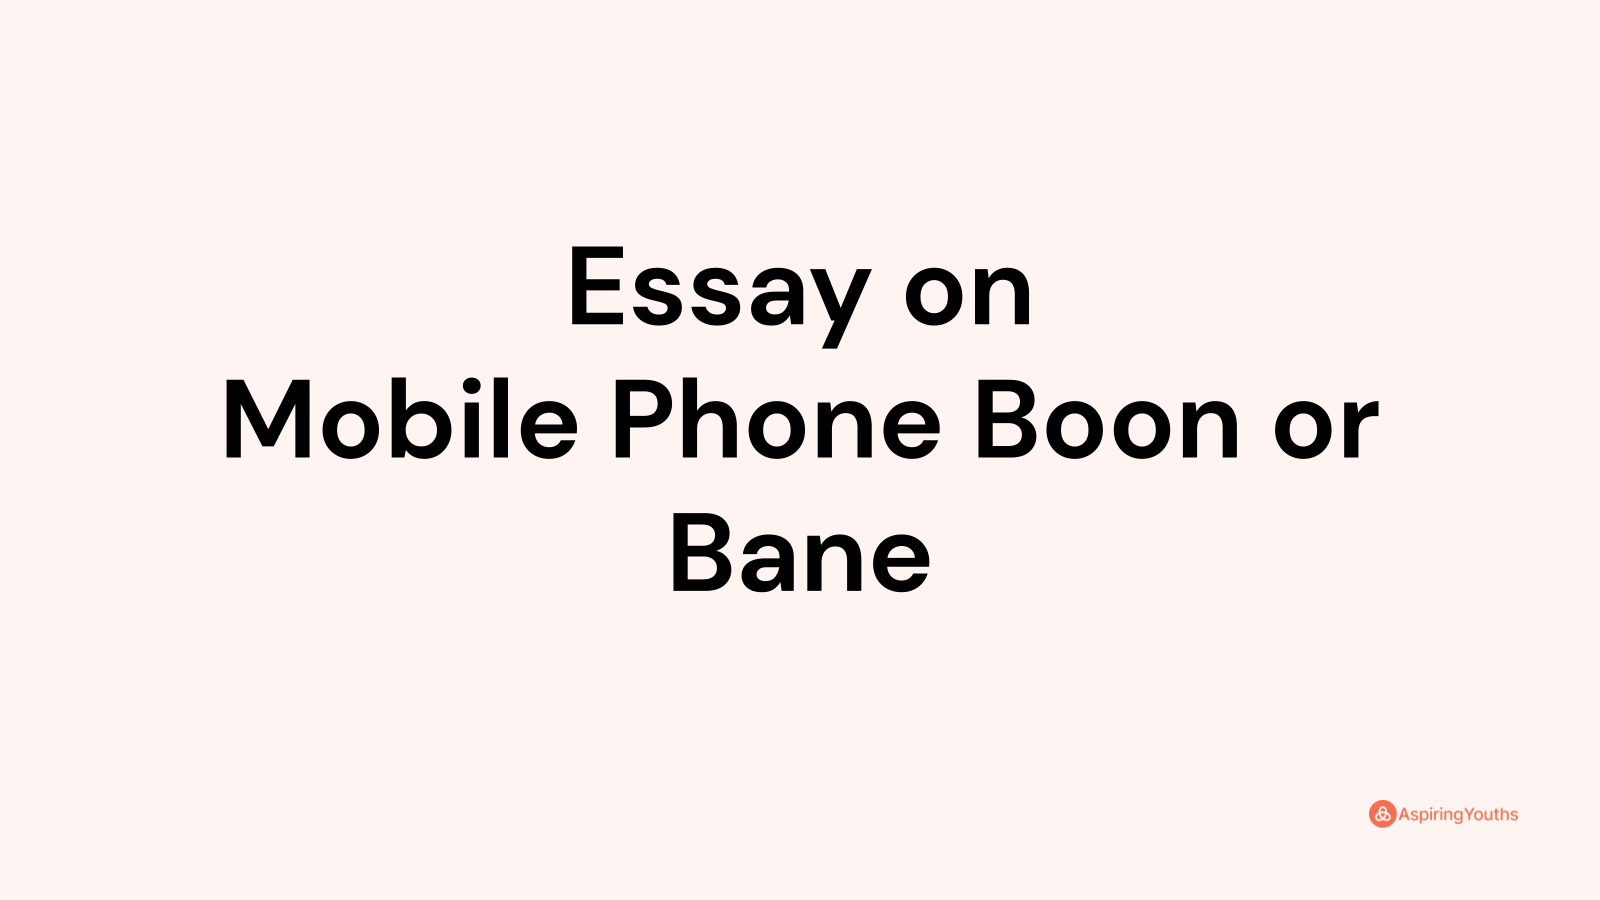 mobile phone boon or bane essay for school students